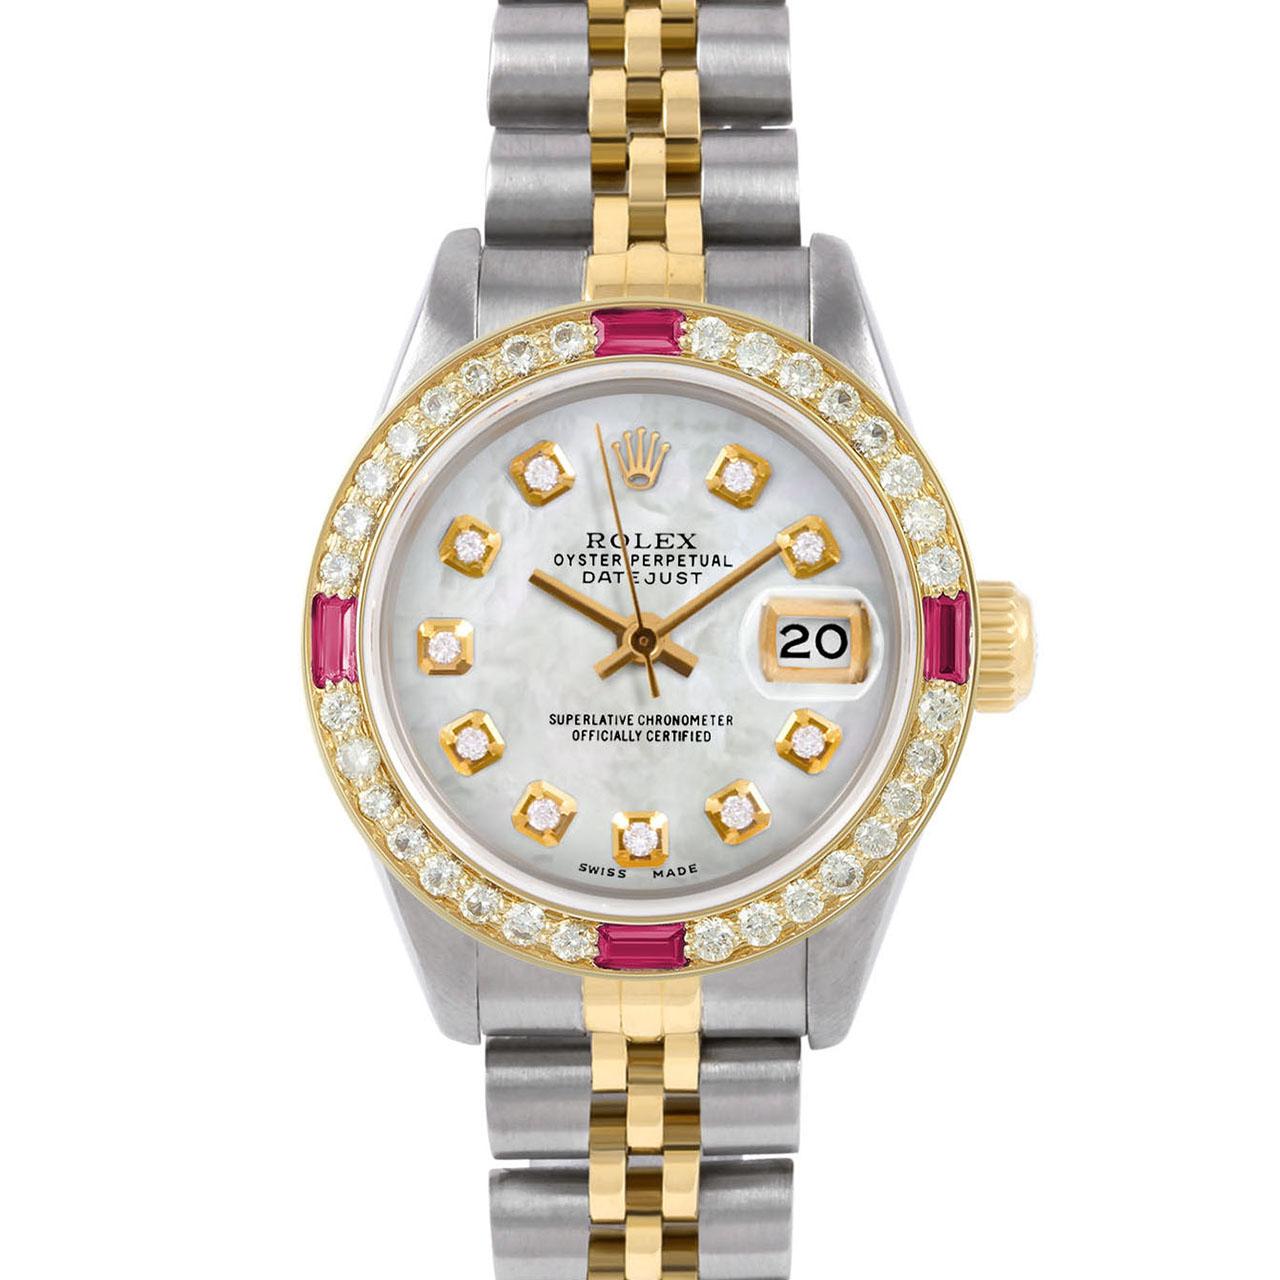 Swiss Wrist - SKU 6917-TT-CHM-DIA-AM-BDS-JBL

Brand : Rolex
Model : Datejust (Non-Quickset Model)
Gender : Ladies
Metals : 14K/Stainless Steel
Case Size : 26 mm

Dial : Custom Mother Of Pearl Diamond Dial (This dial is not original Rolex And has